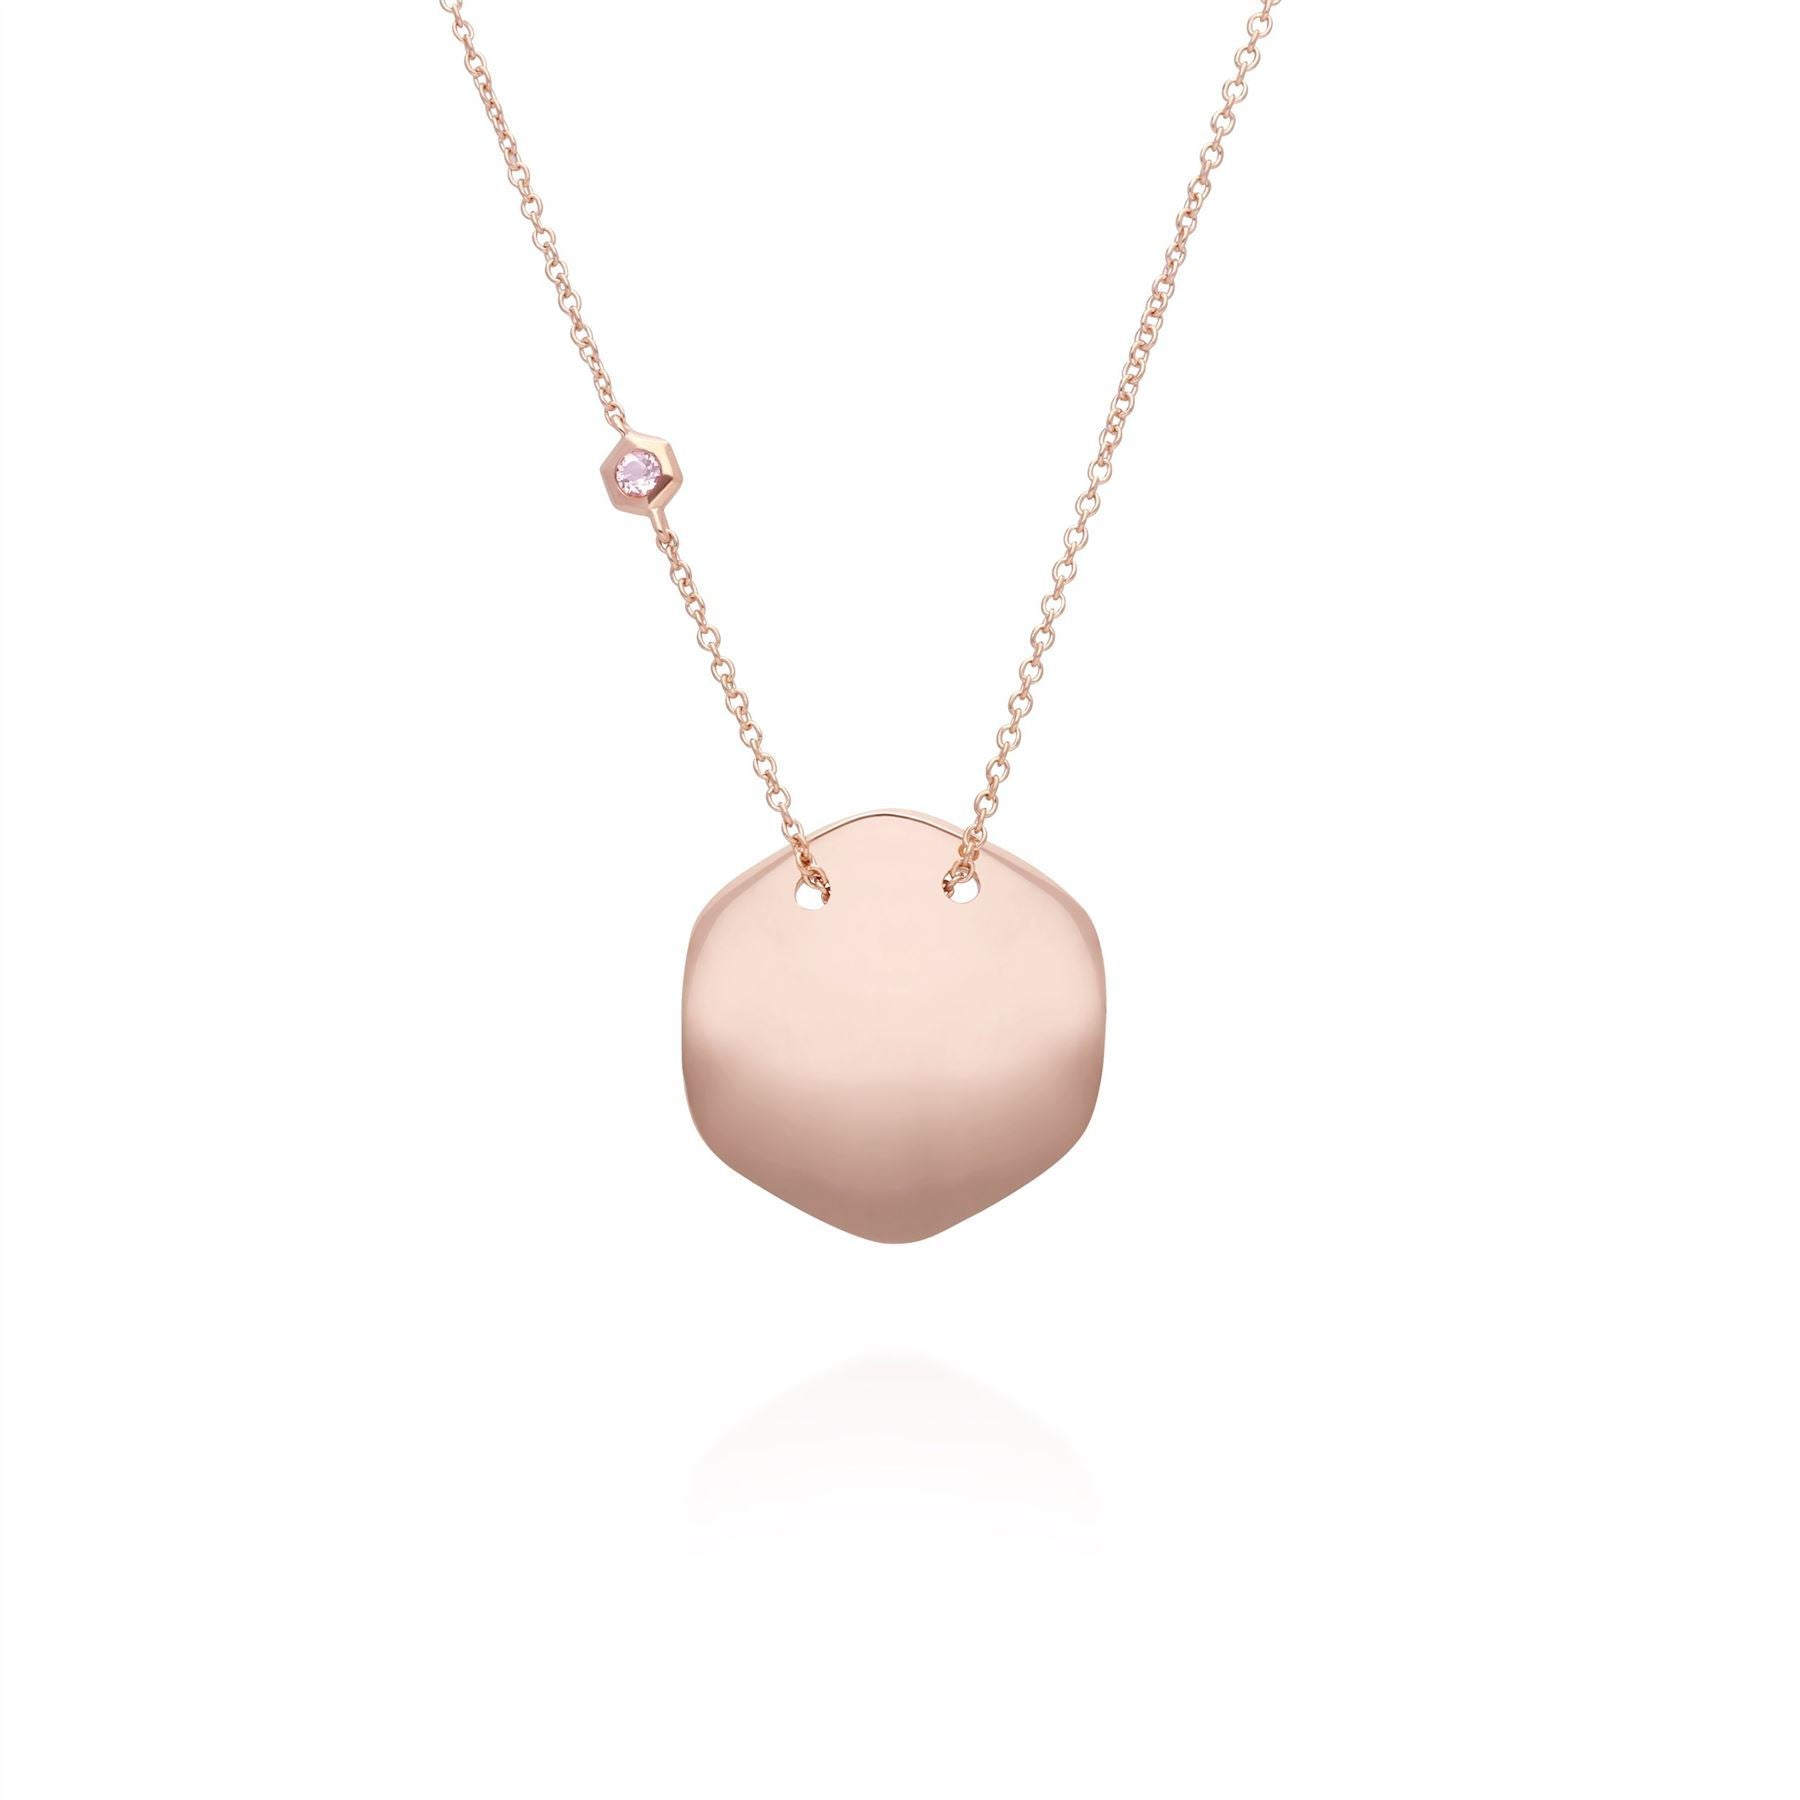 Morganite Engravable Necklace in Rose Gold Plated Sterling Silver